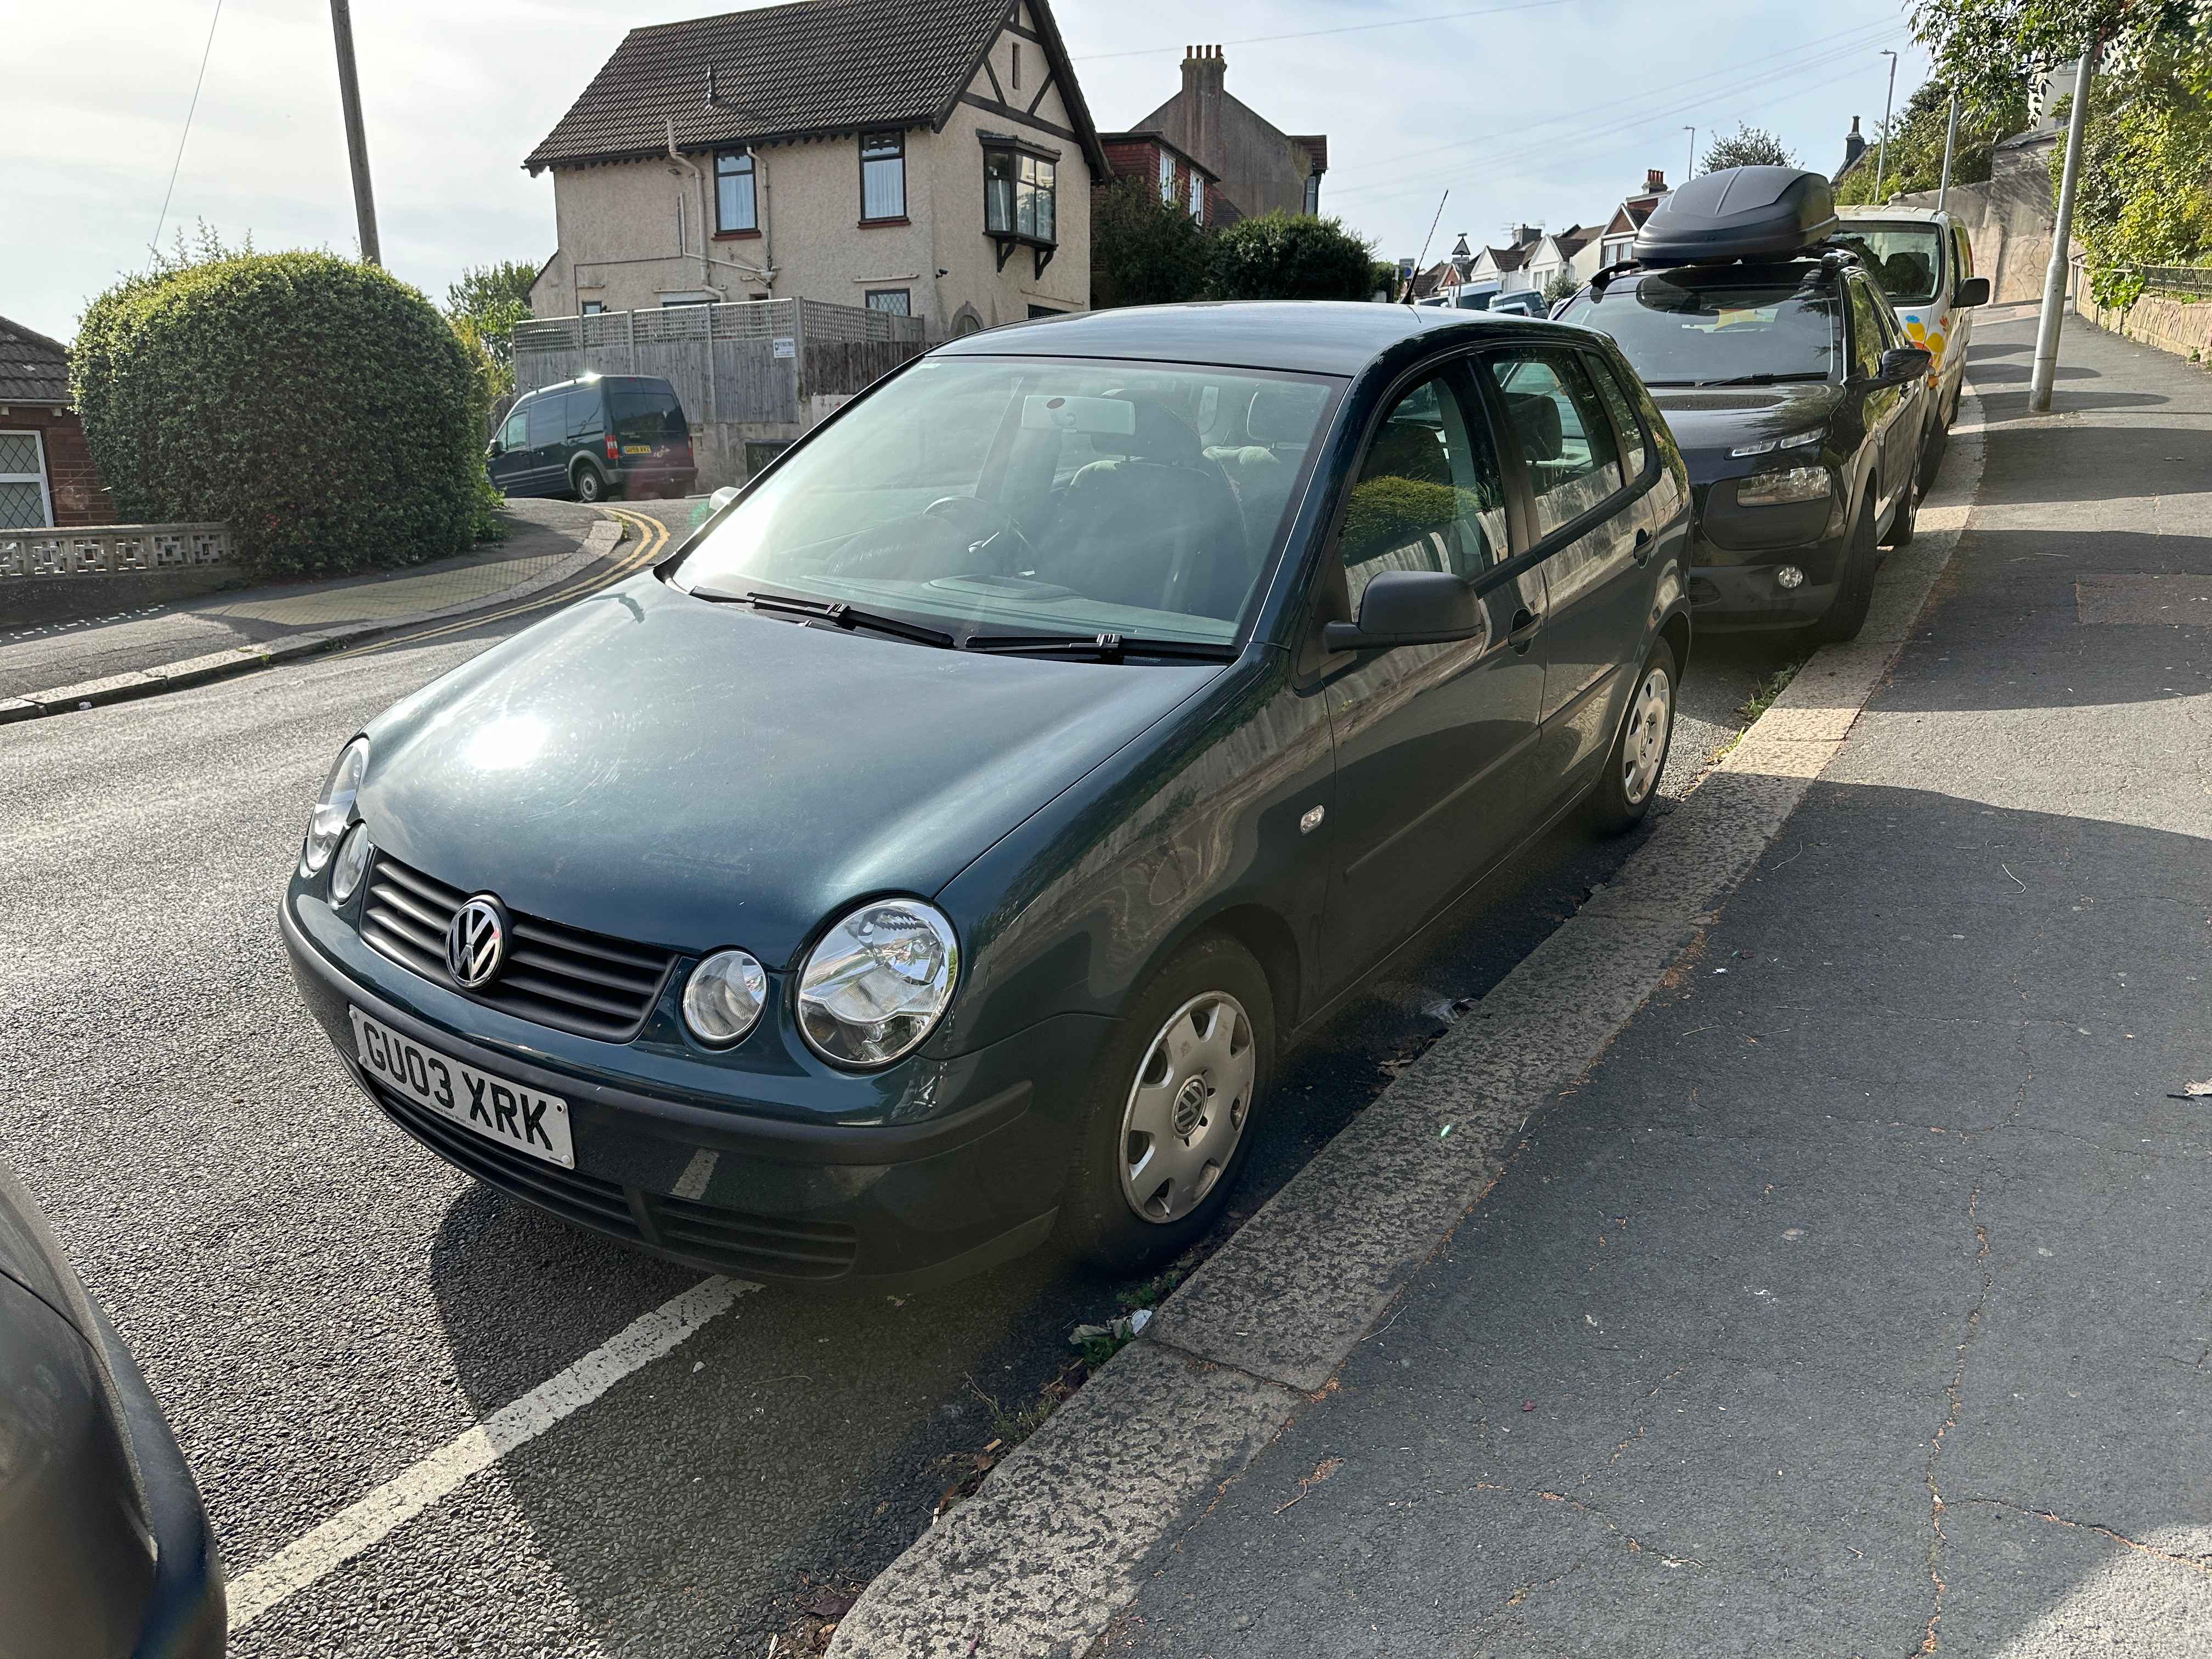 Photograph of GU03 XRK - a Green Volkswagen Polo parked in Hollingdean by a non-resident. The first of eight photographs supplied by the residents of Hollingdean.